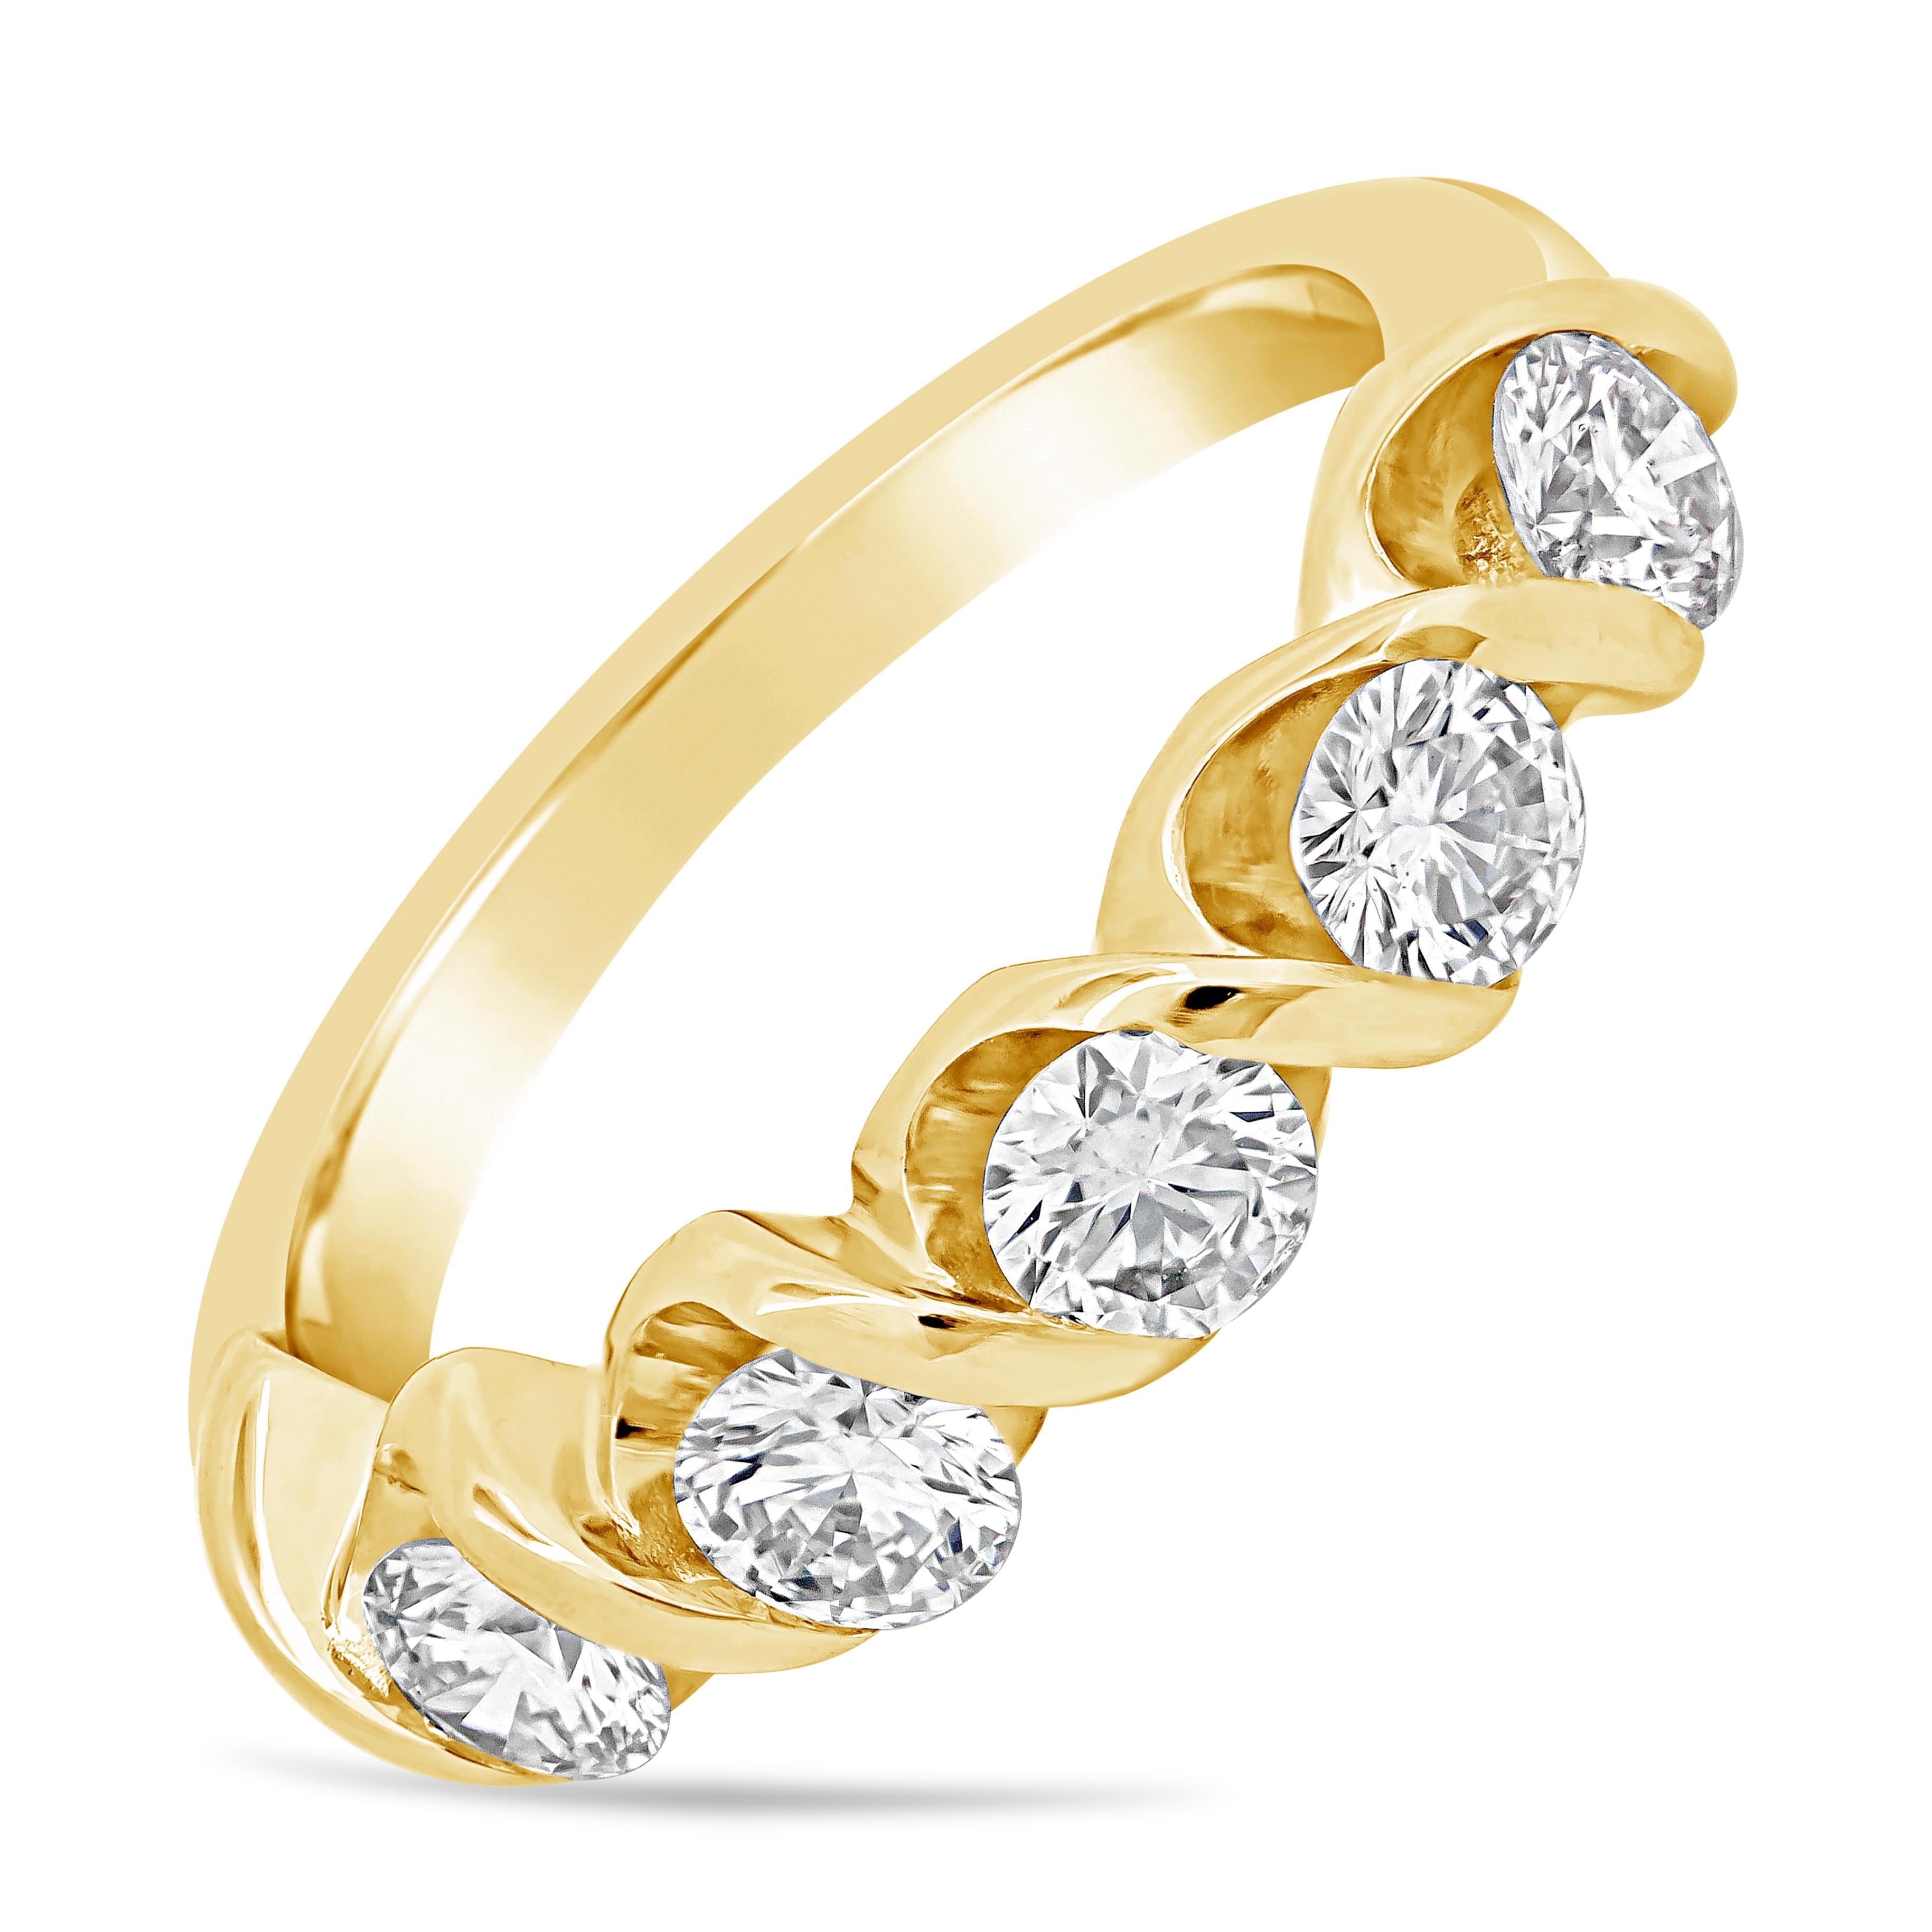 Uniquely-designed and expertly-crafted wedding band set with 5 round brilliant diamonds weighing 1.01 carats total, bar set in a twisting design composition. Made with 18K Yellow Gold, Size 6.75 US resizable upon request.

Roman Malakov is a custom